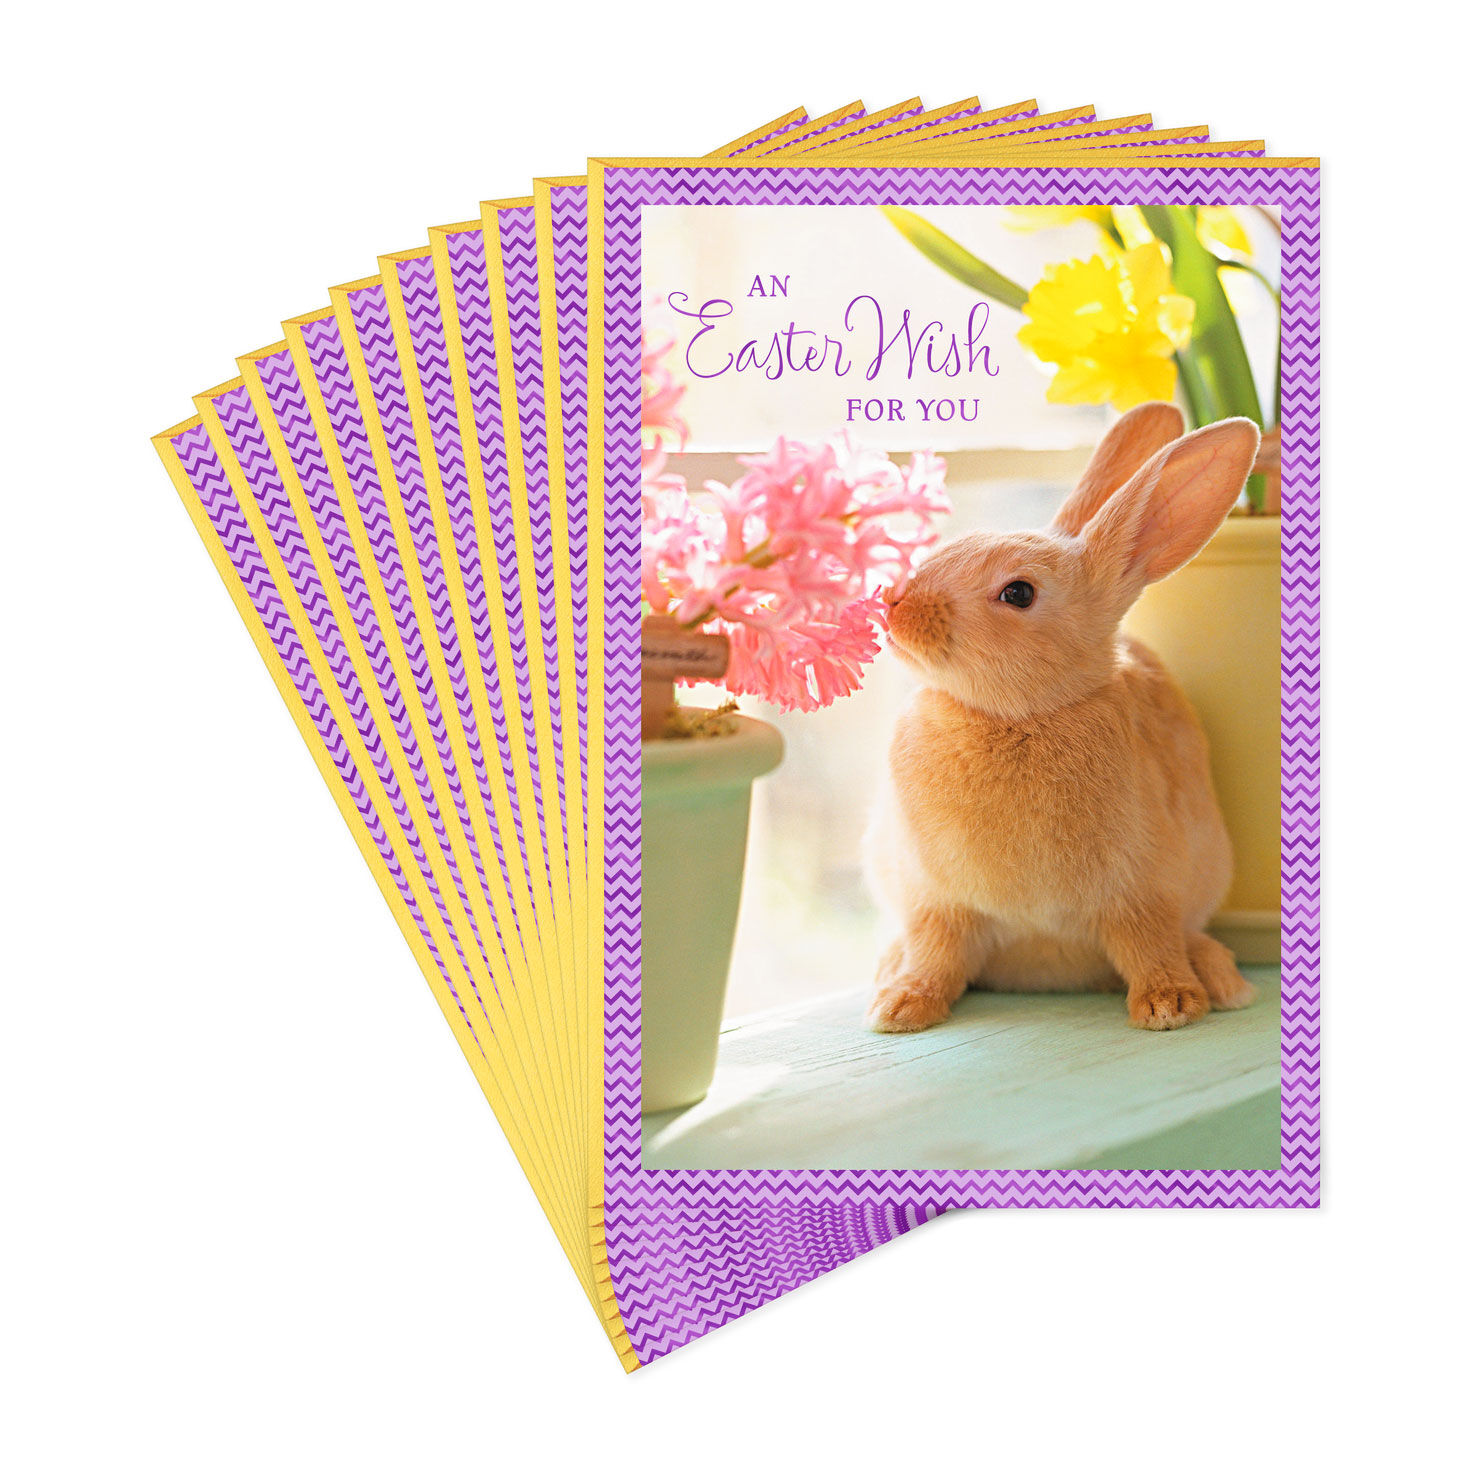 NEW Extra Bright Holiday Boxed Christmas Cards Bunny Rabbit Lights 14 Cards